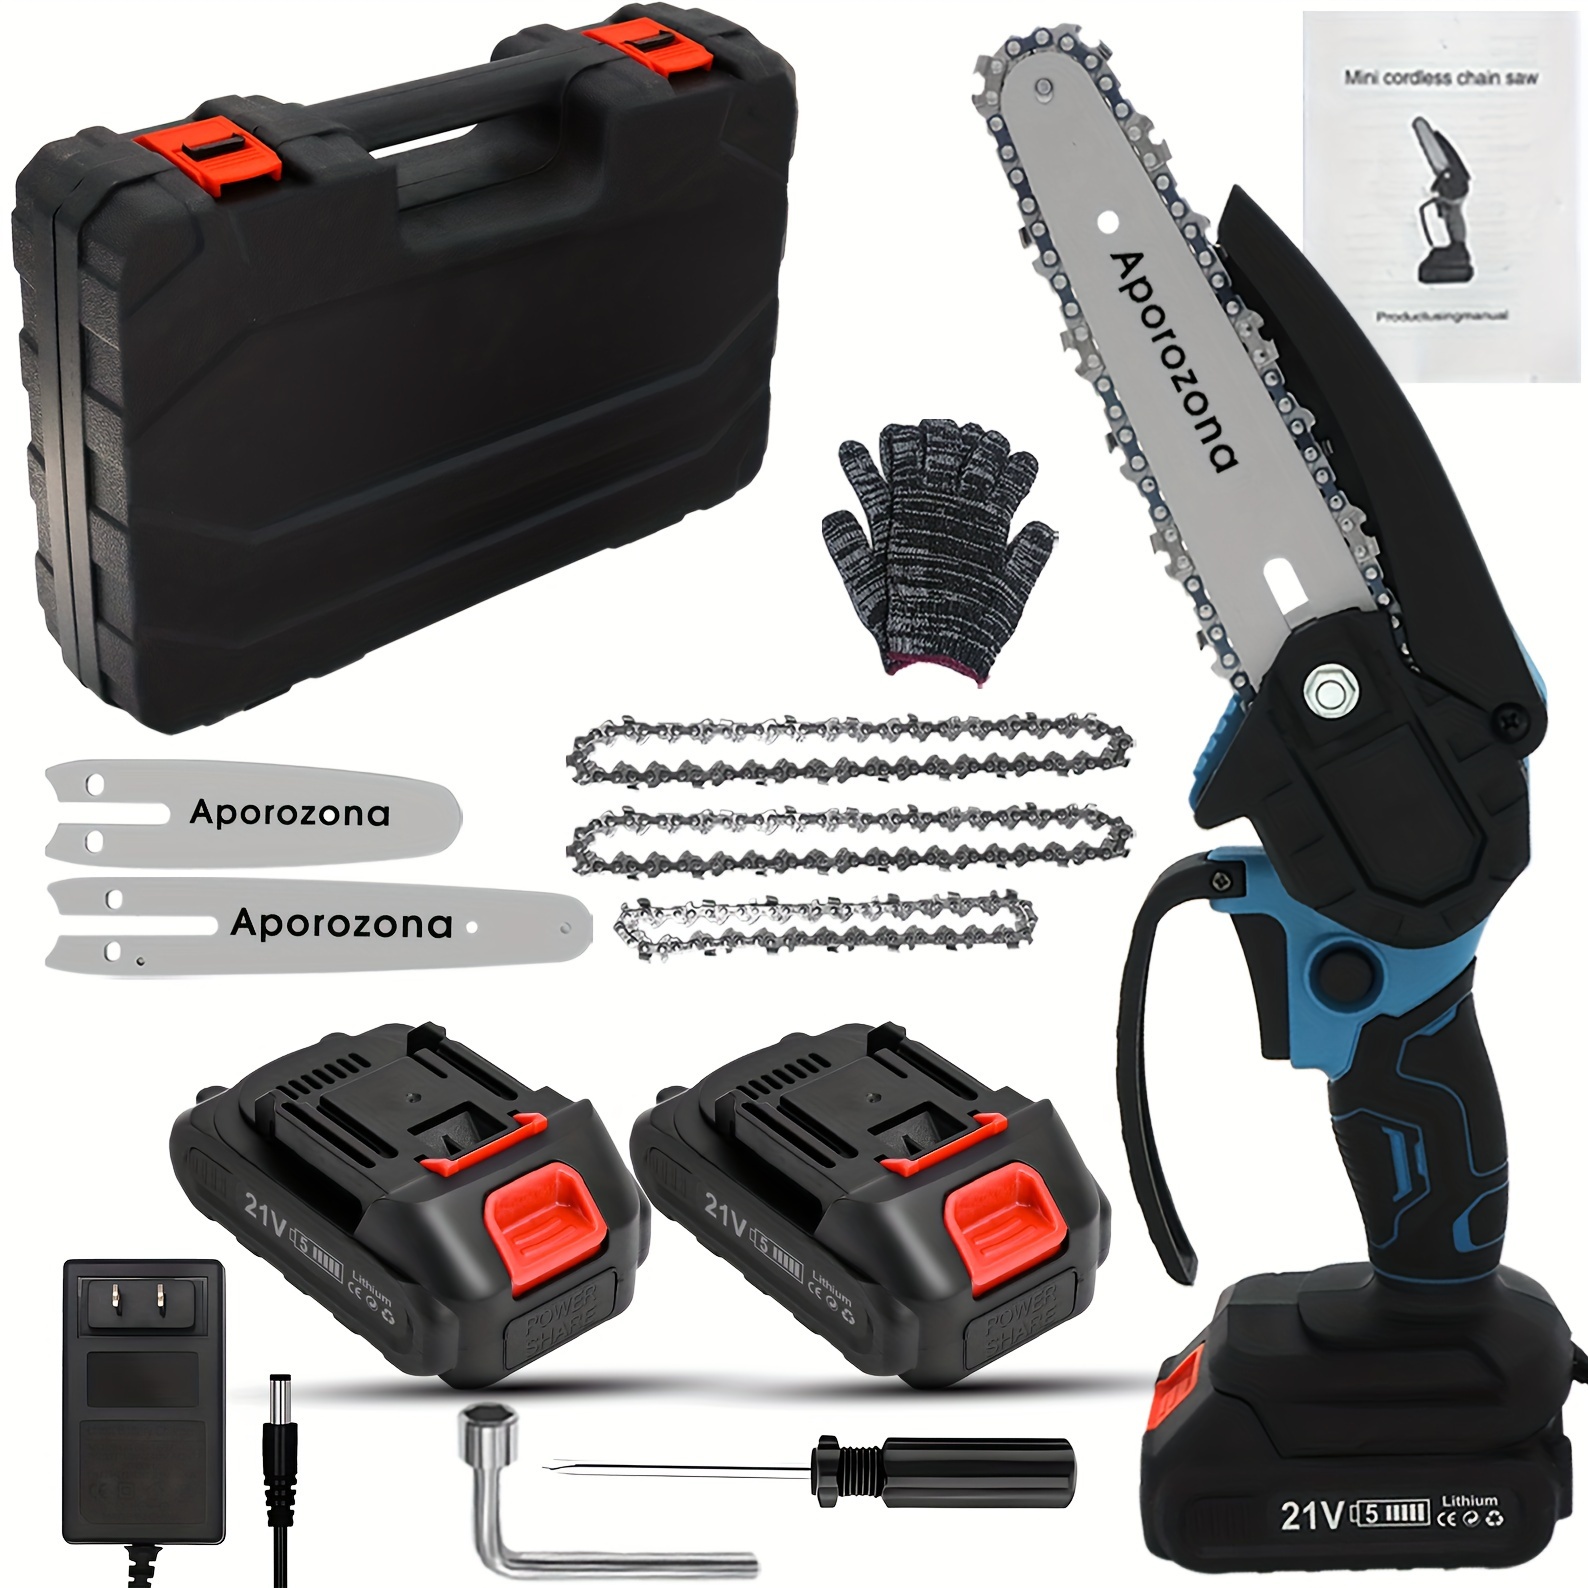 

Mini Chainsaw Cordless 6 Inch [gardener Friendly] Super Handheld Rechargeable Chain Saw With Upgraded 3 Chains 2 Piece 21v Batteries, Small Battery Powered For Wood/trees Cutting